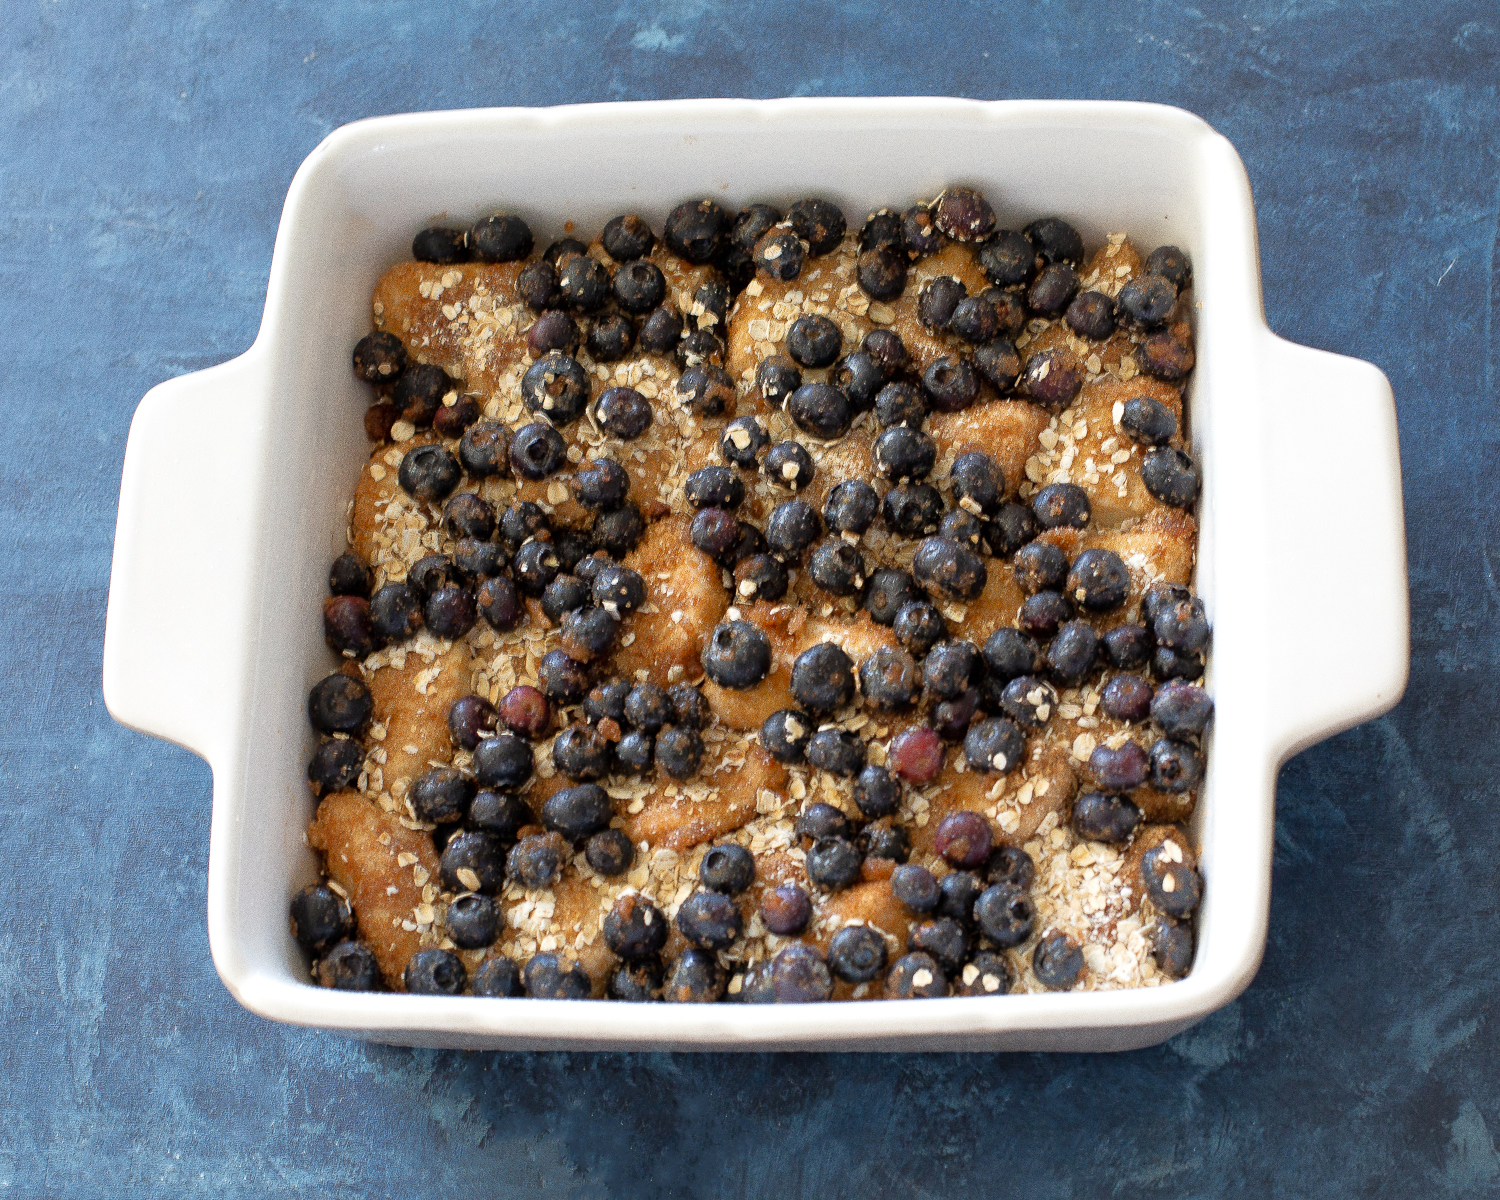 Blueberry Biscuit Bake